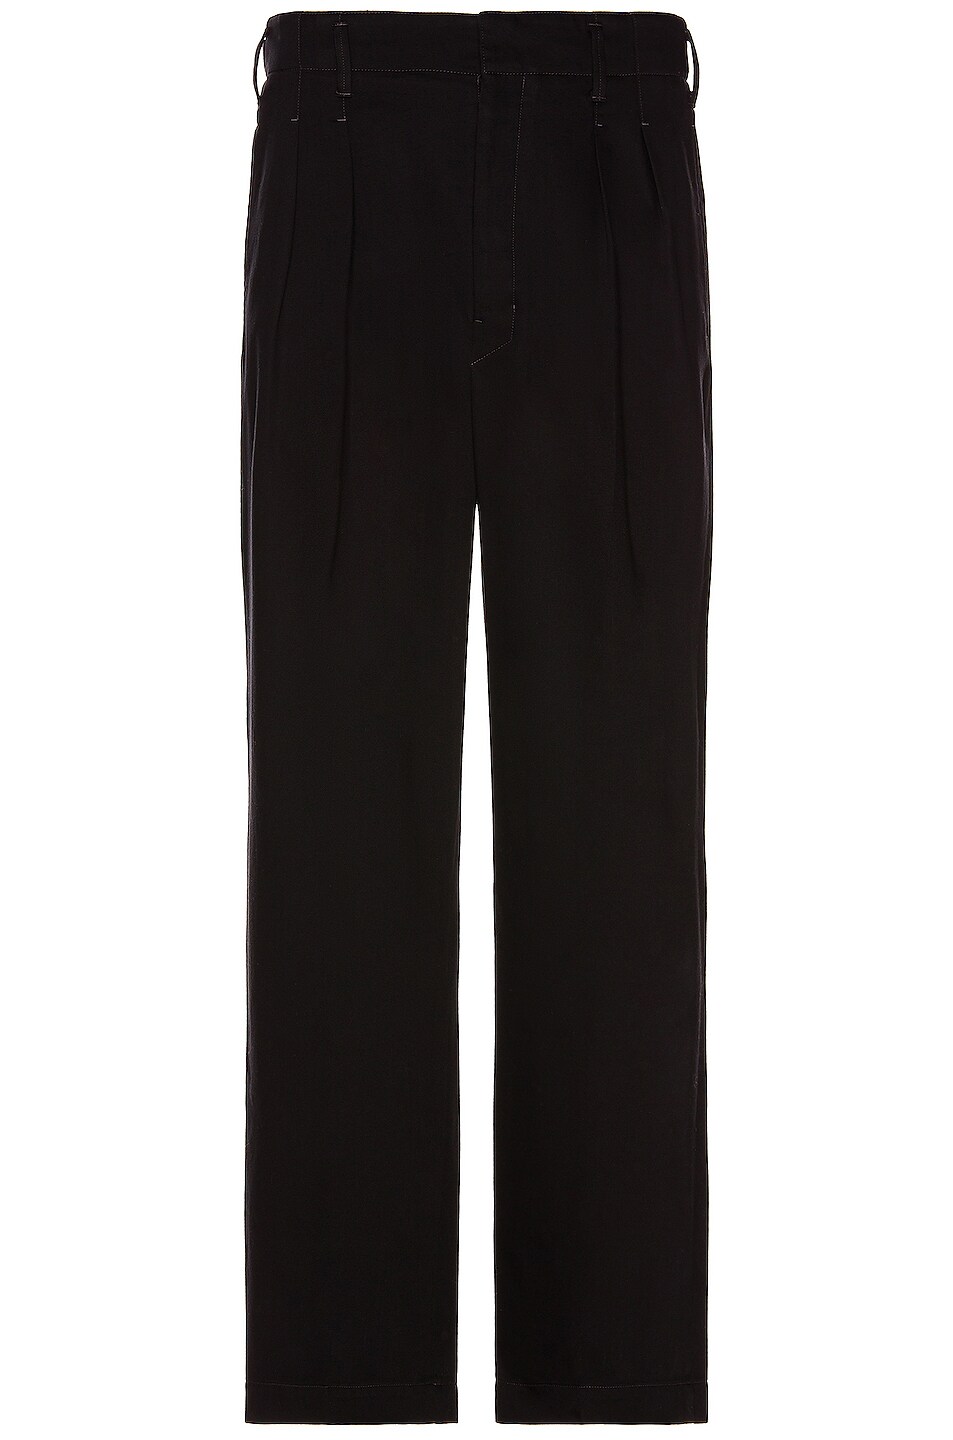 Image 1 of Lemaire 2 Pleat Pants in Black